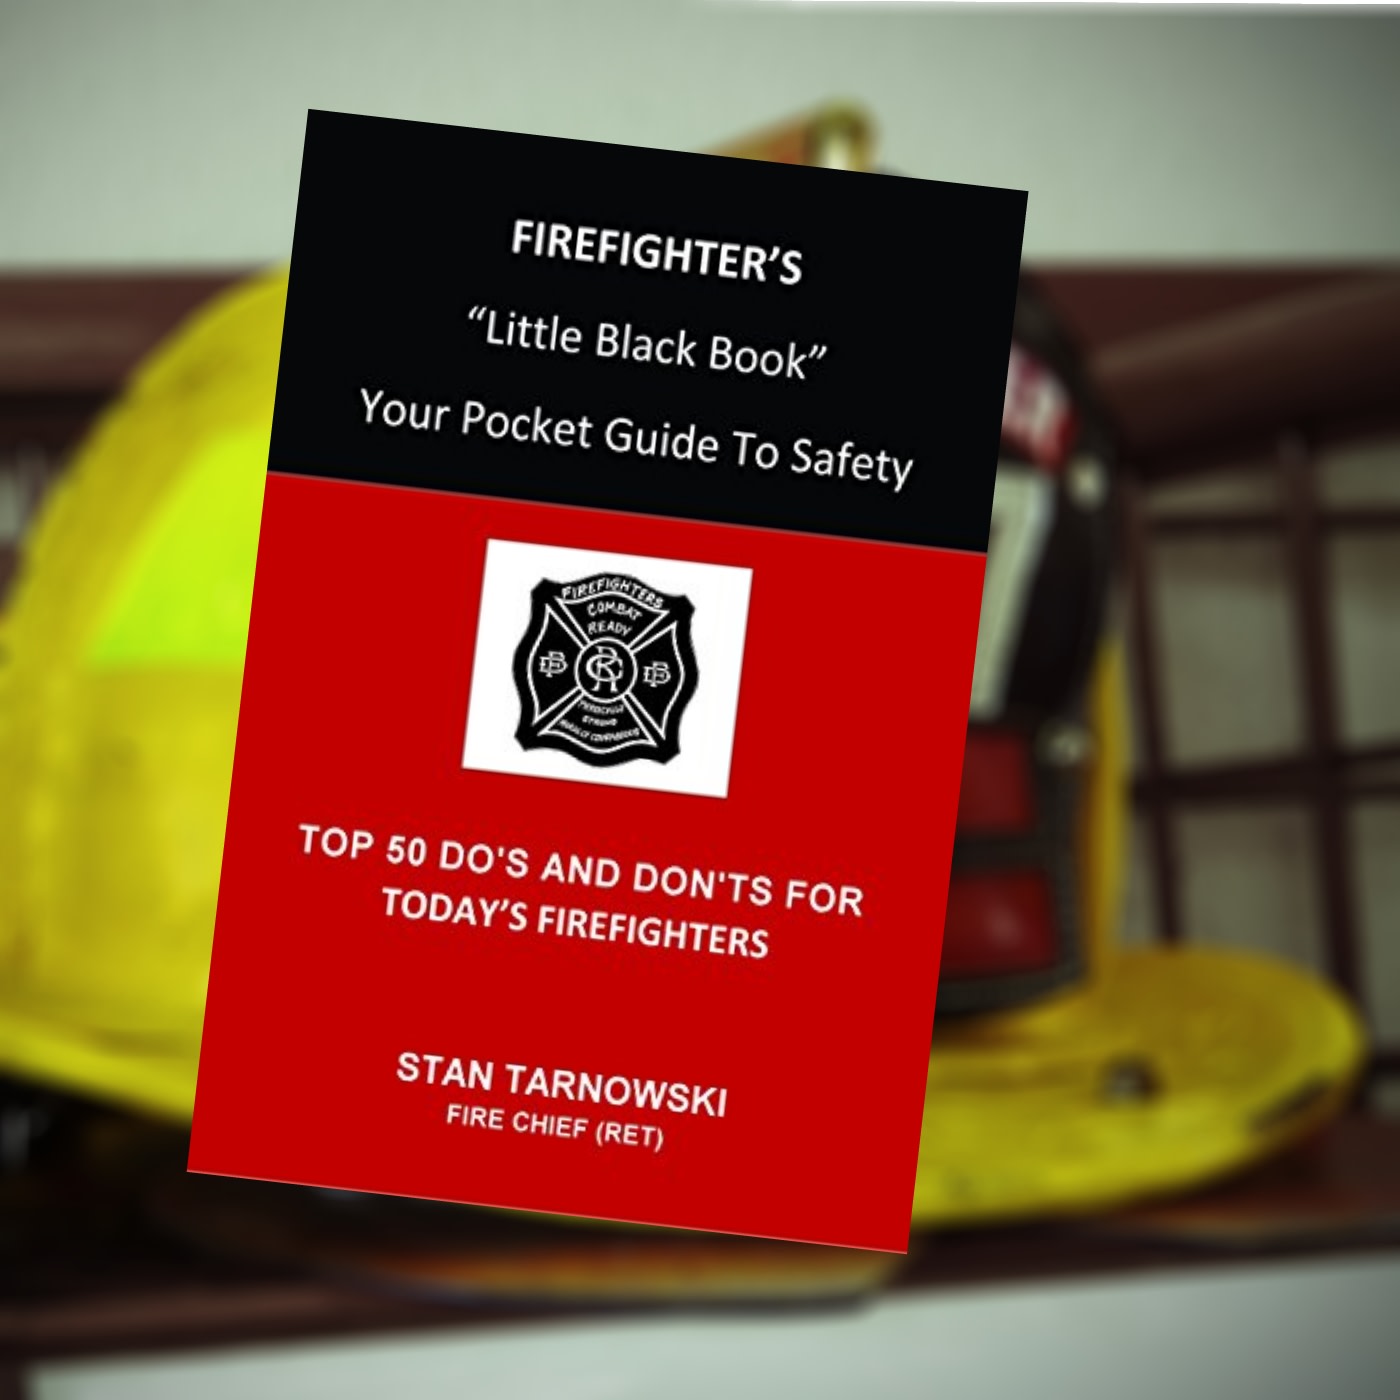 Artwork for podcast Code 3 - The Firefighters' Podcast